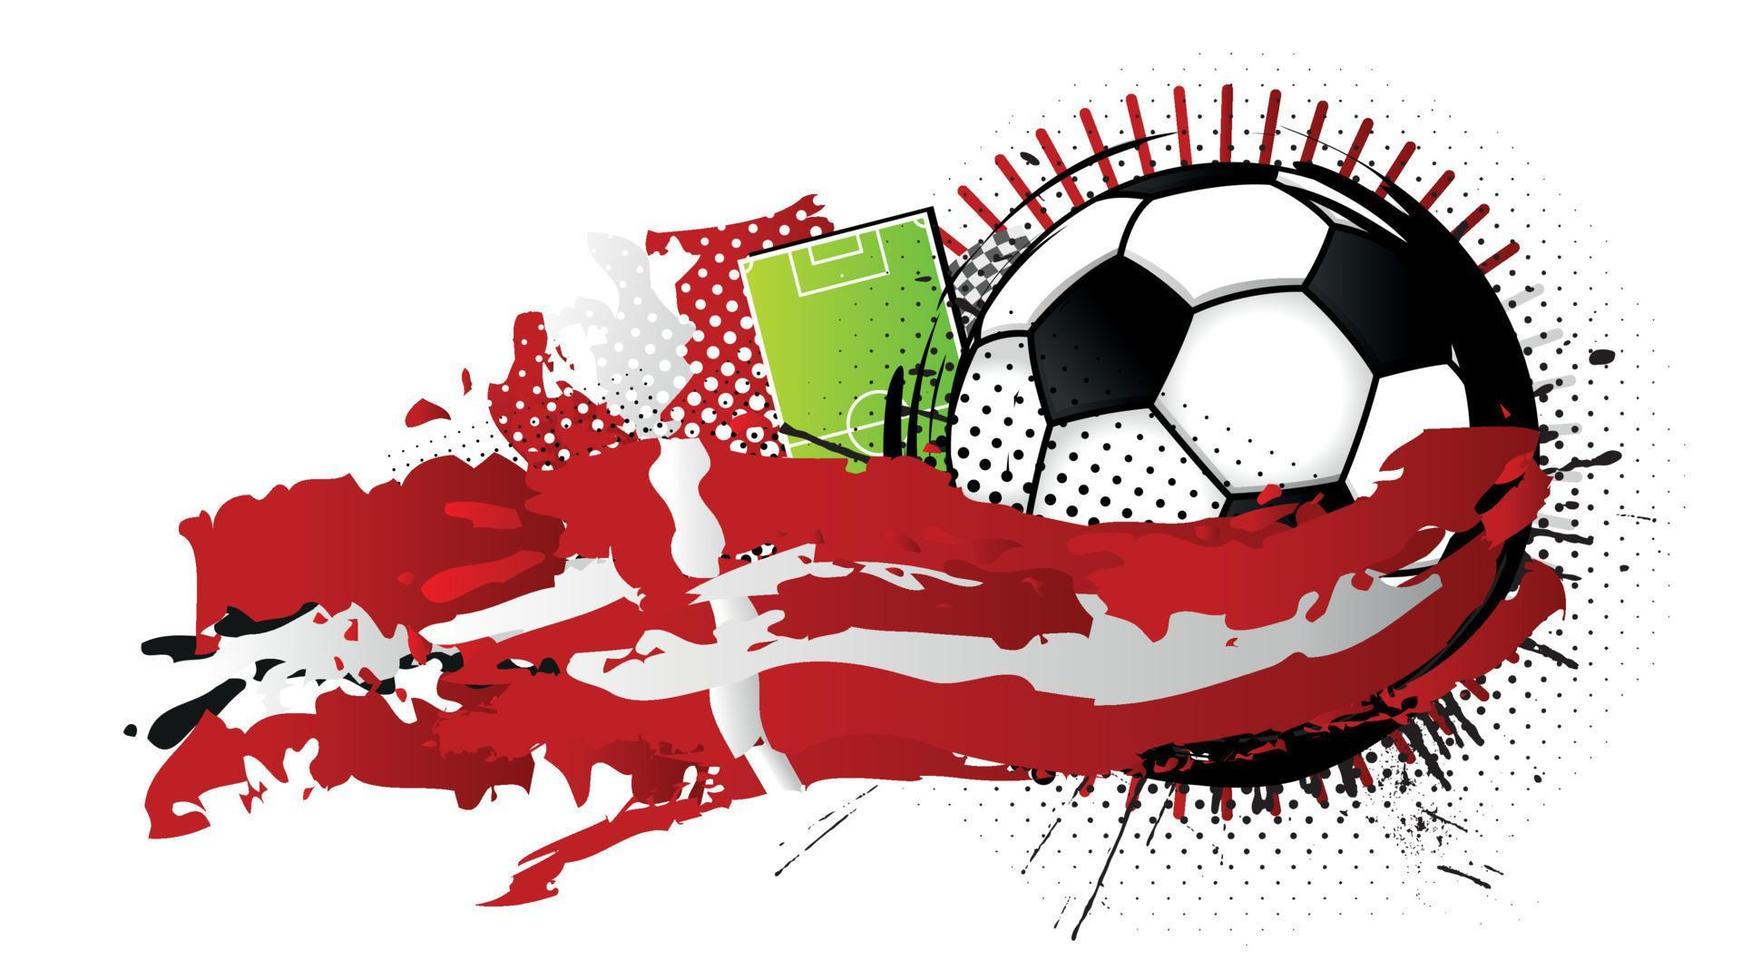 Black and white soccer ball surrounded by red and white spots forming the flag of Denmark with a soccer field in the background. Vector image